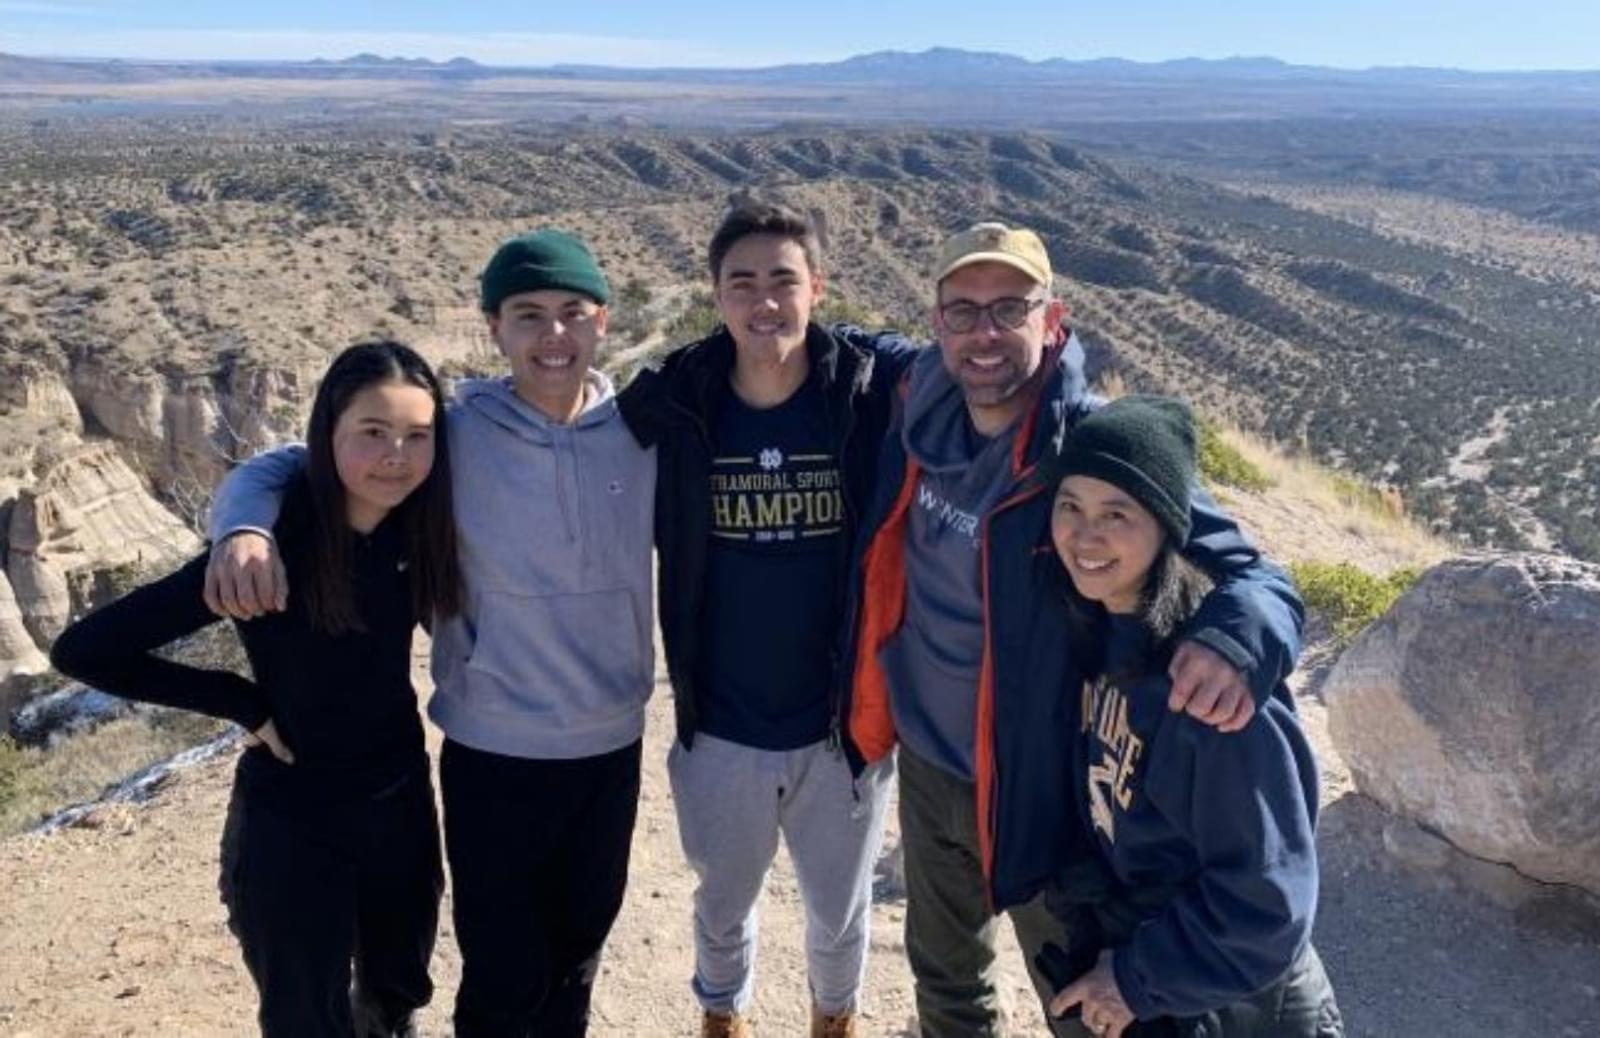 iRelaunch team member Mari Bailey standing with her husband, daugher, and two sons at the Grand Canyon